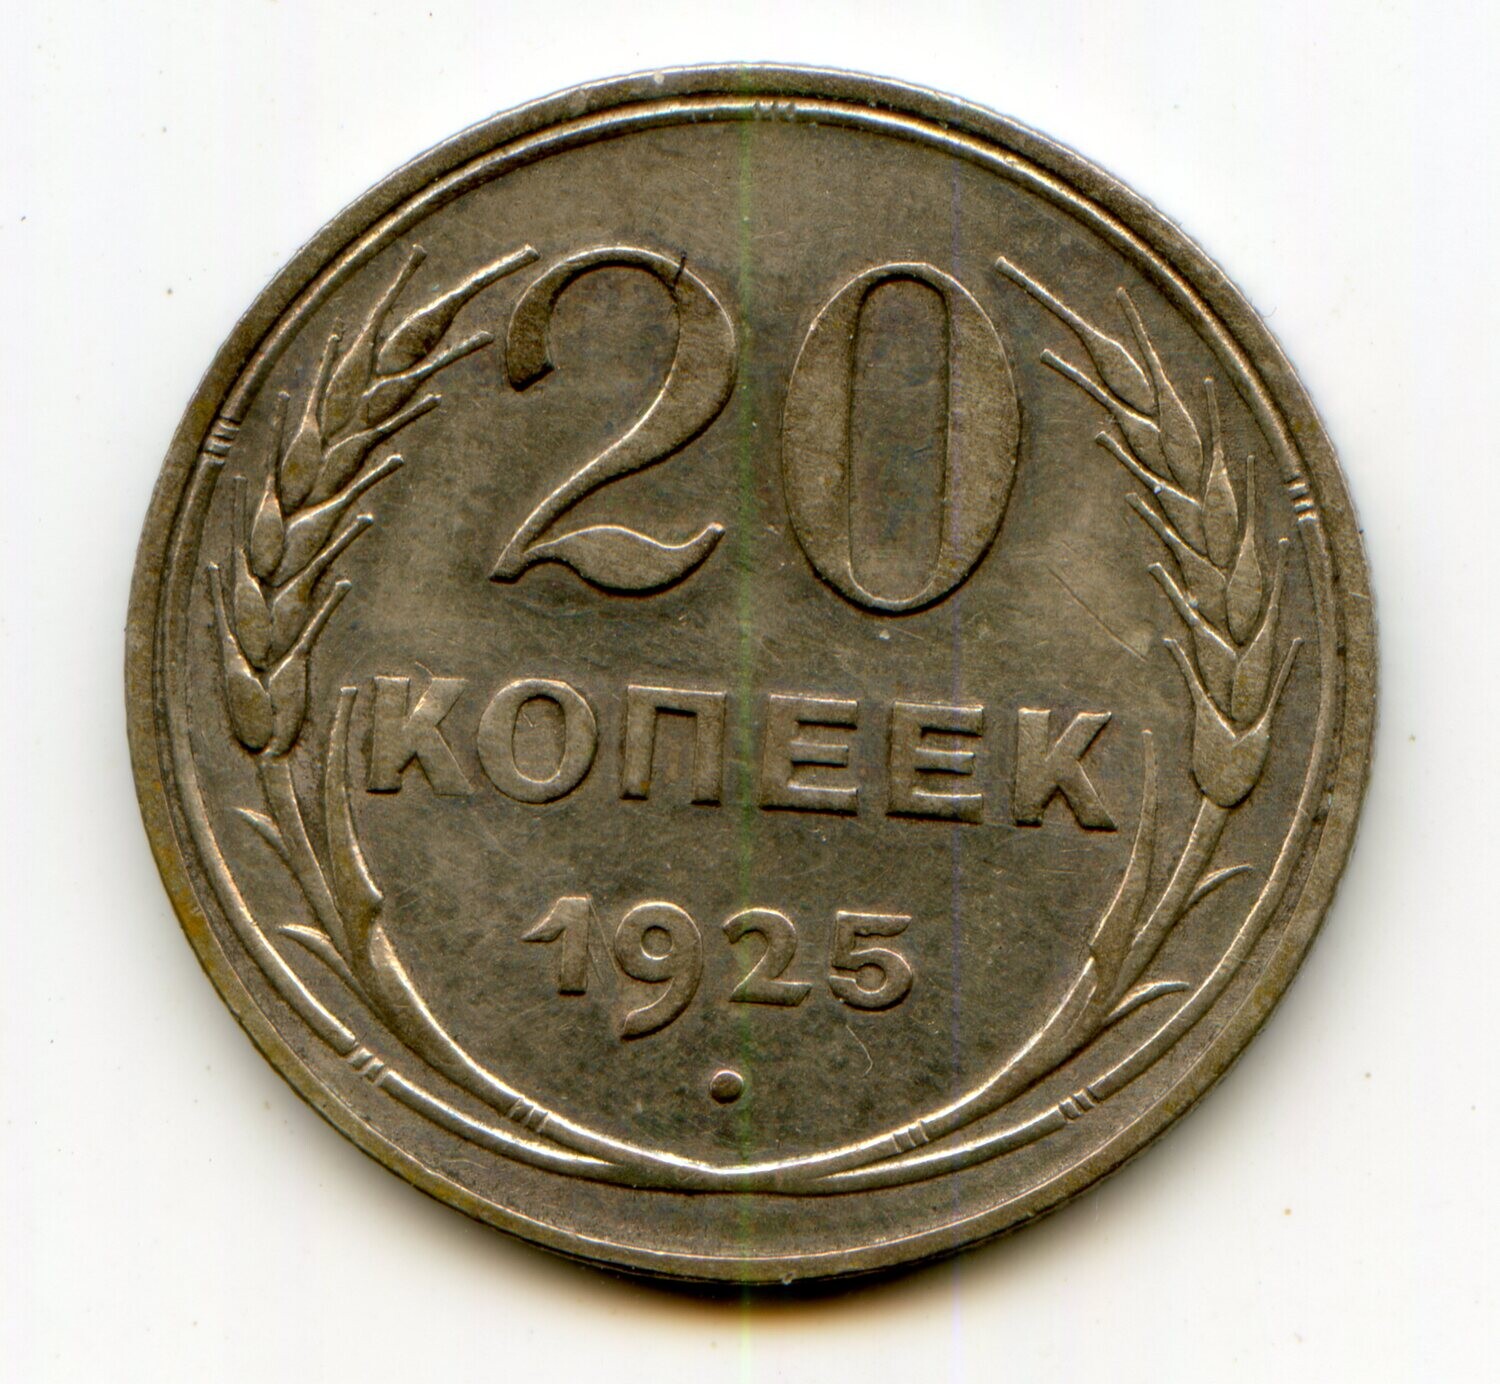 USSR. 1925. 20 kopecks. Type: 1924. 500 Silver 0.0574 Oz, ASW., 3.60 g. Fedorin: 10. Y#88. XF. Note: Obv. stamp 1/ F-9